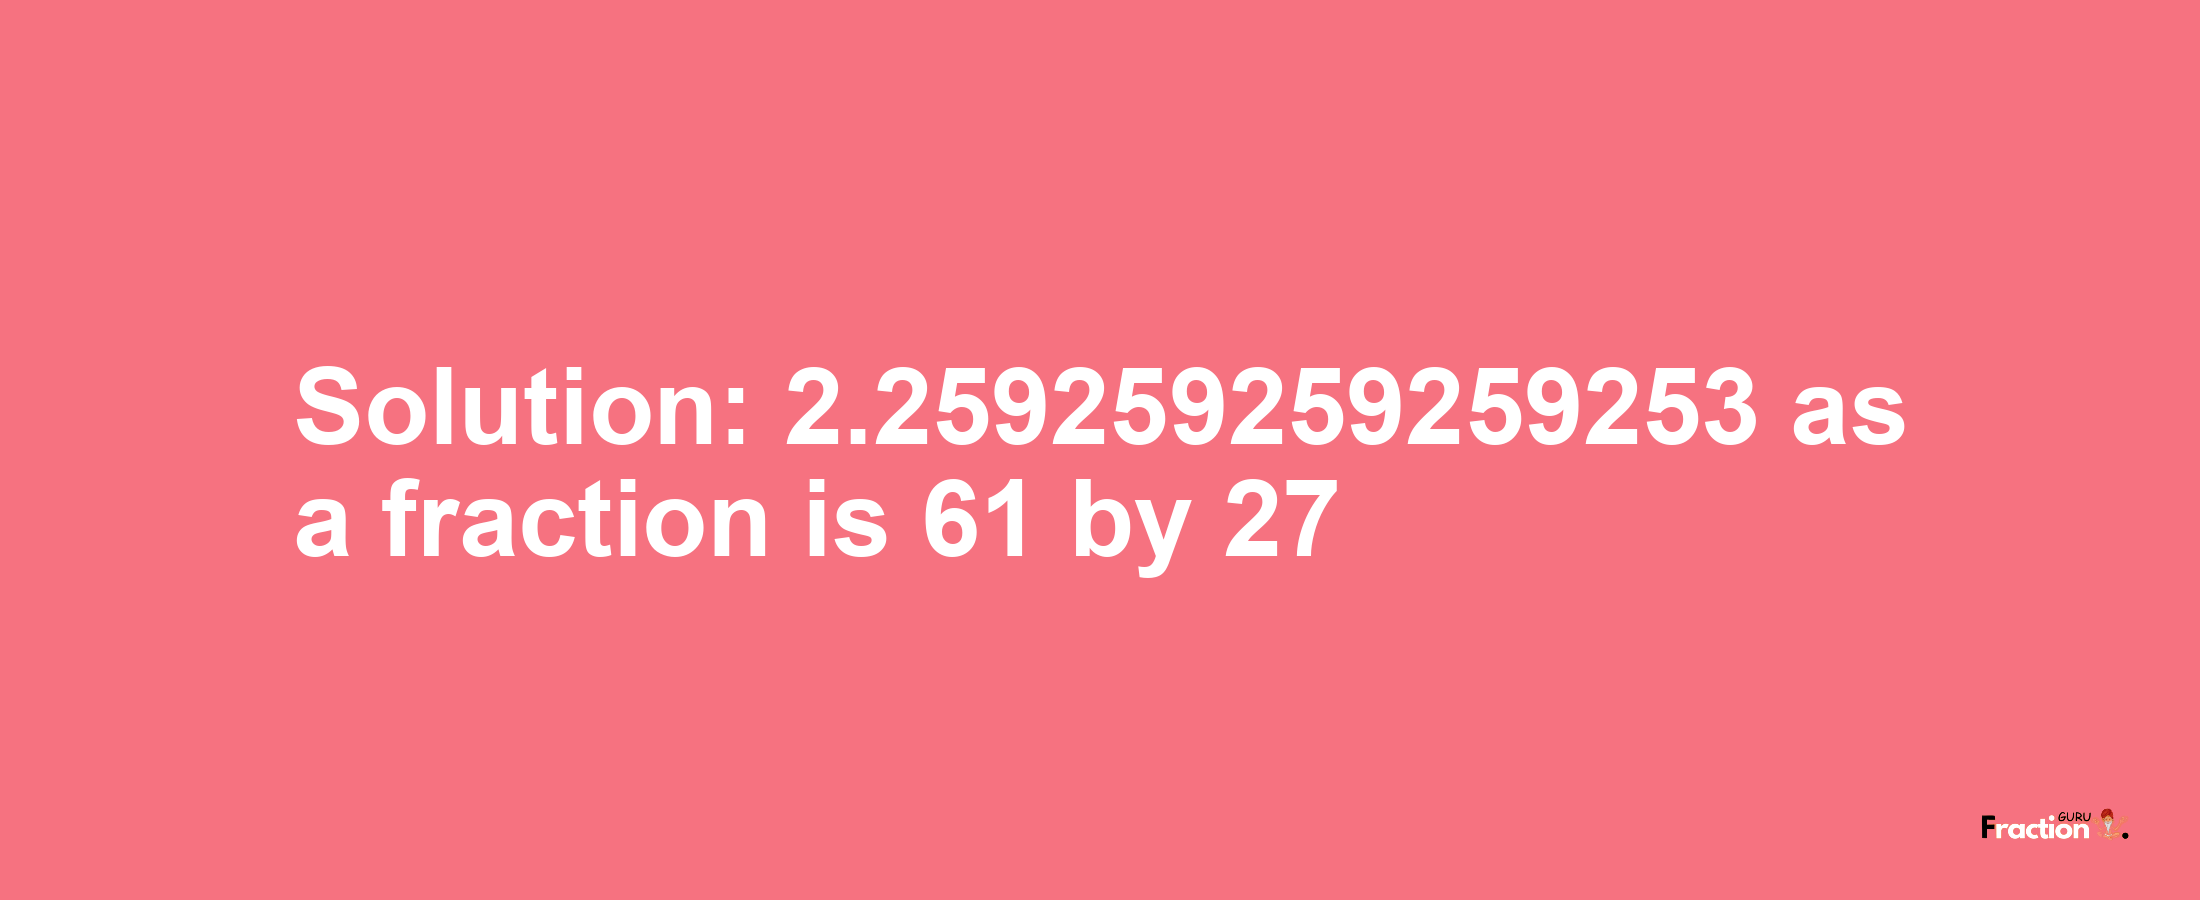 Solution:2.259259259259253 as a fraction is 61/27